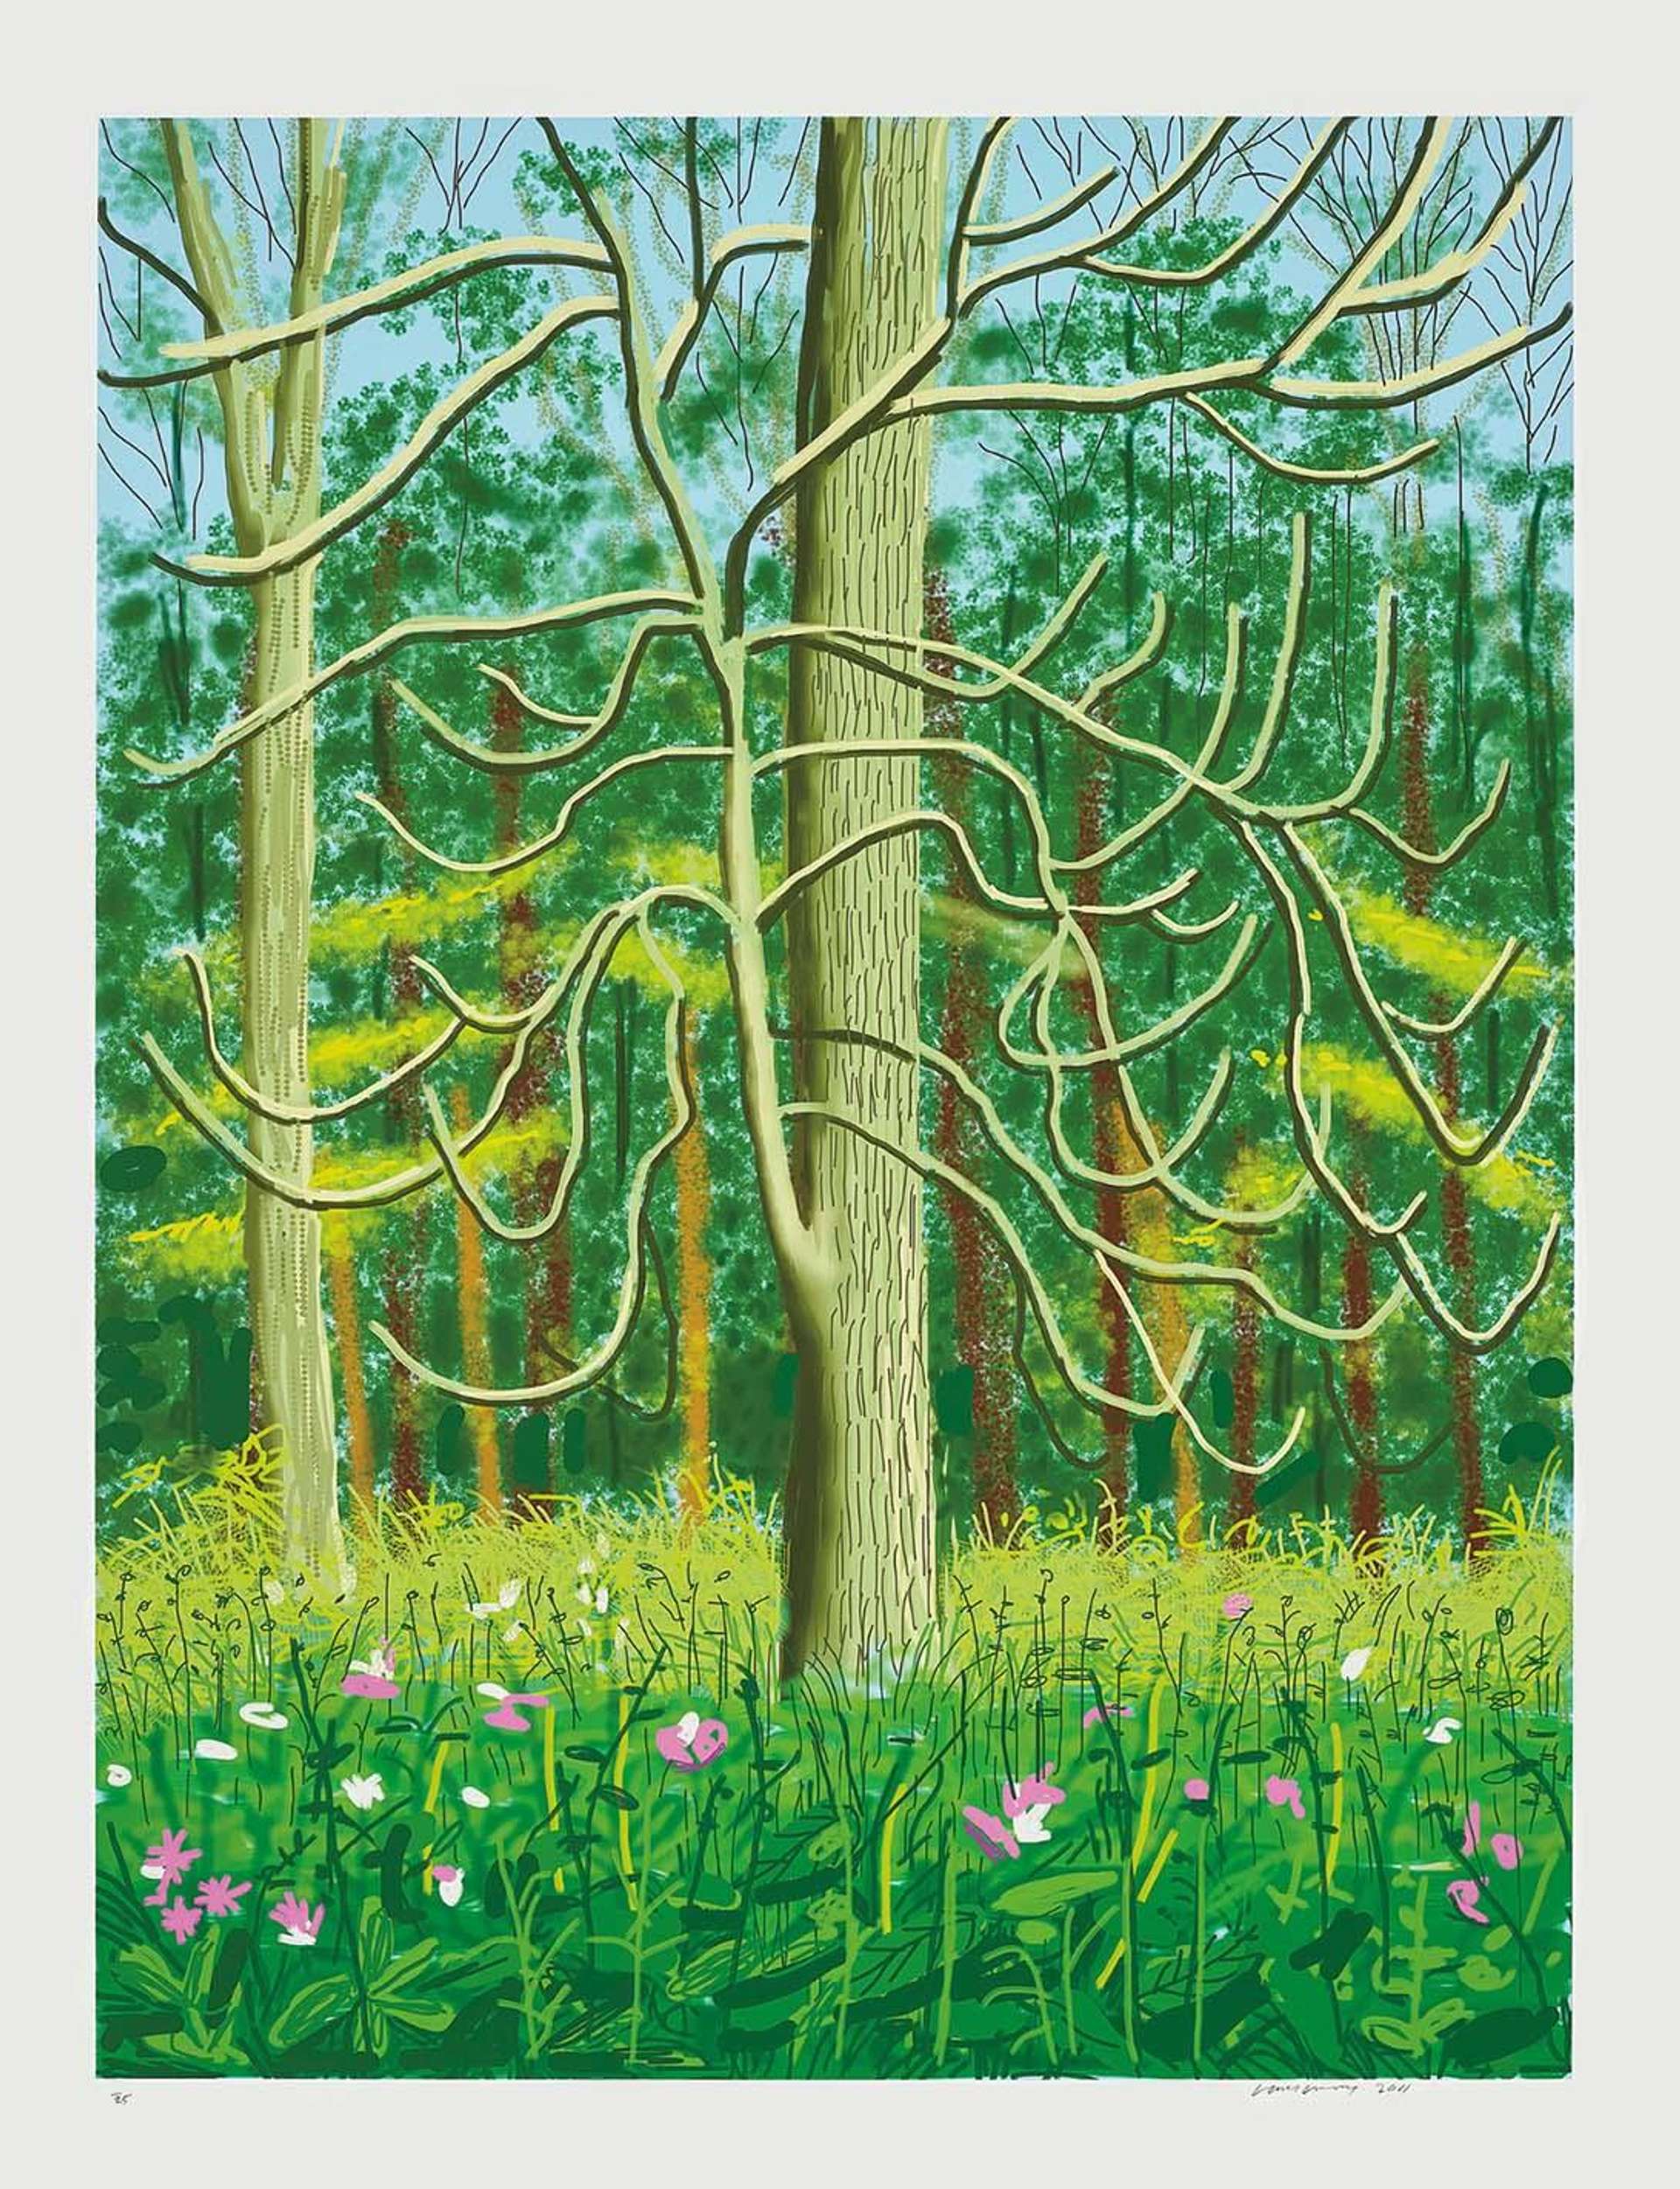 A tree emerges from a bed of vibrant green grass. The tree, at the centre of the composition, has bare branches which spread across the digital print. The entire print is executed in bold greens and brown, except the flowers which are depicted in pink and white.